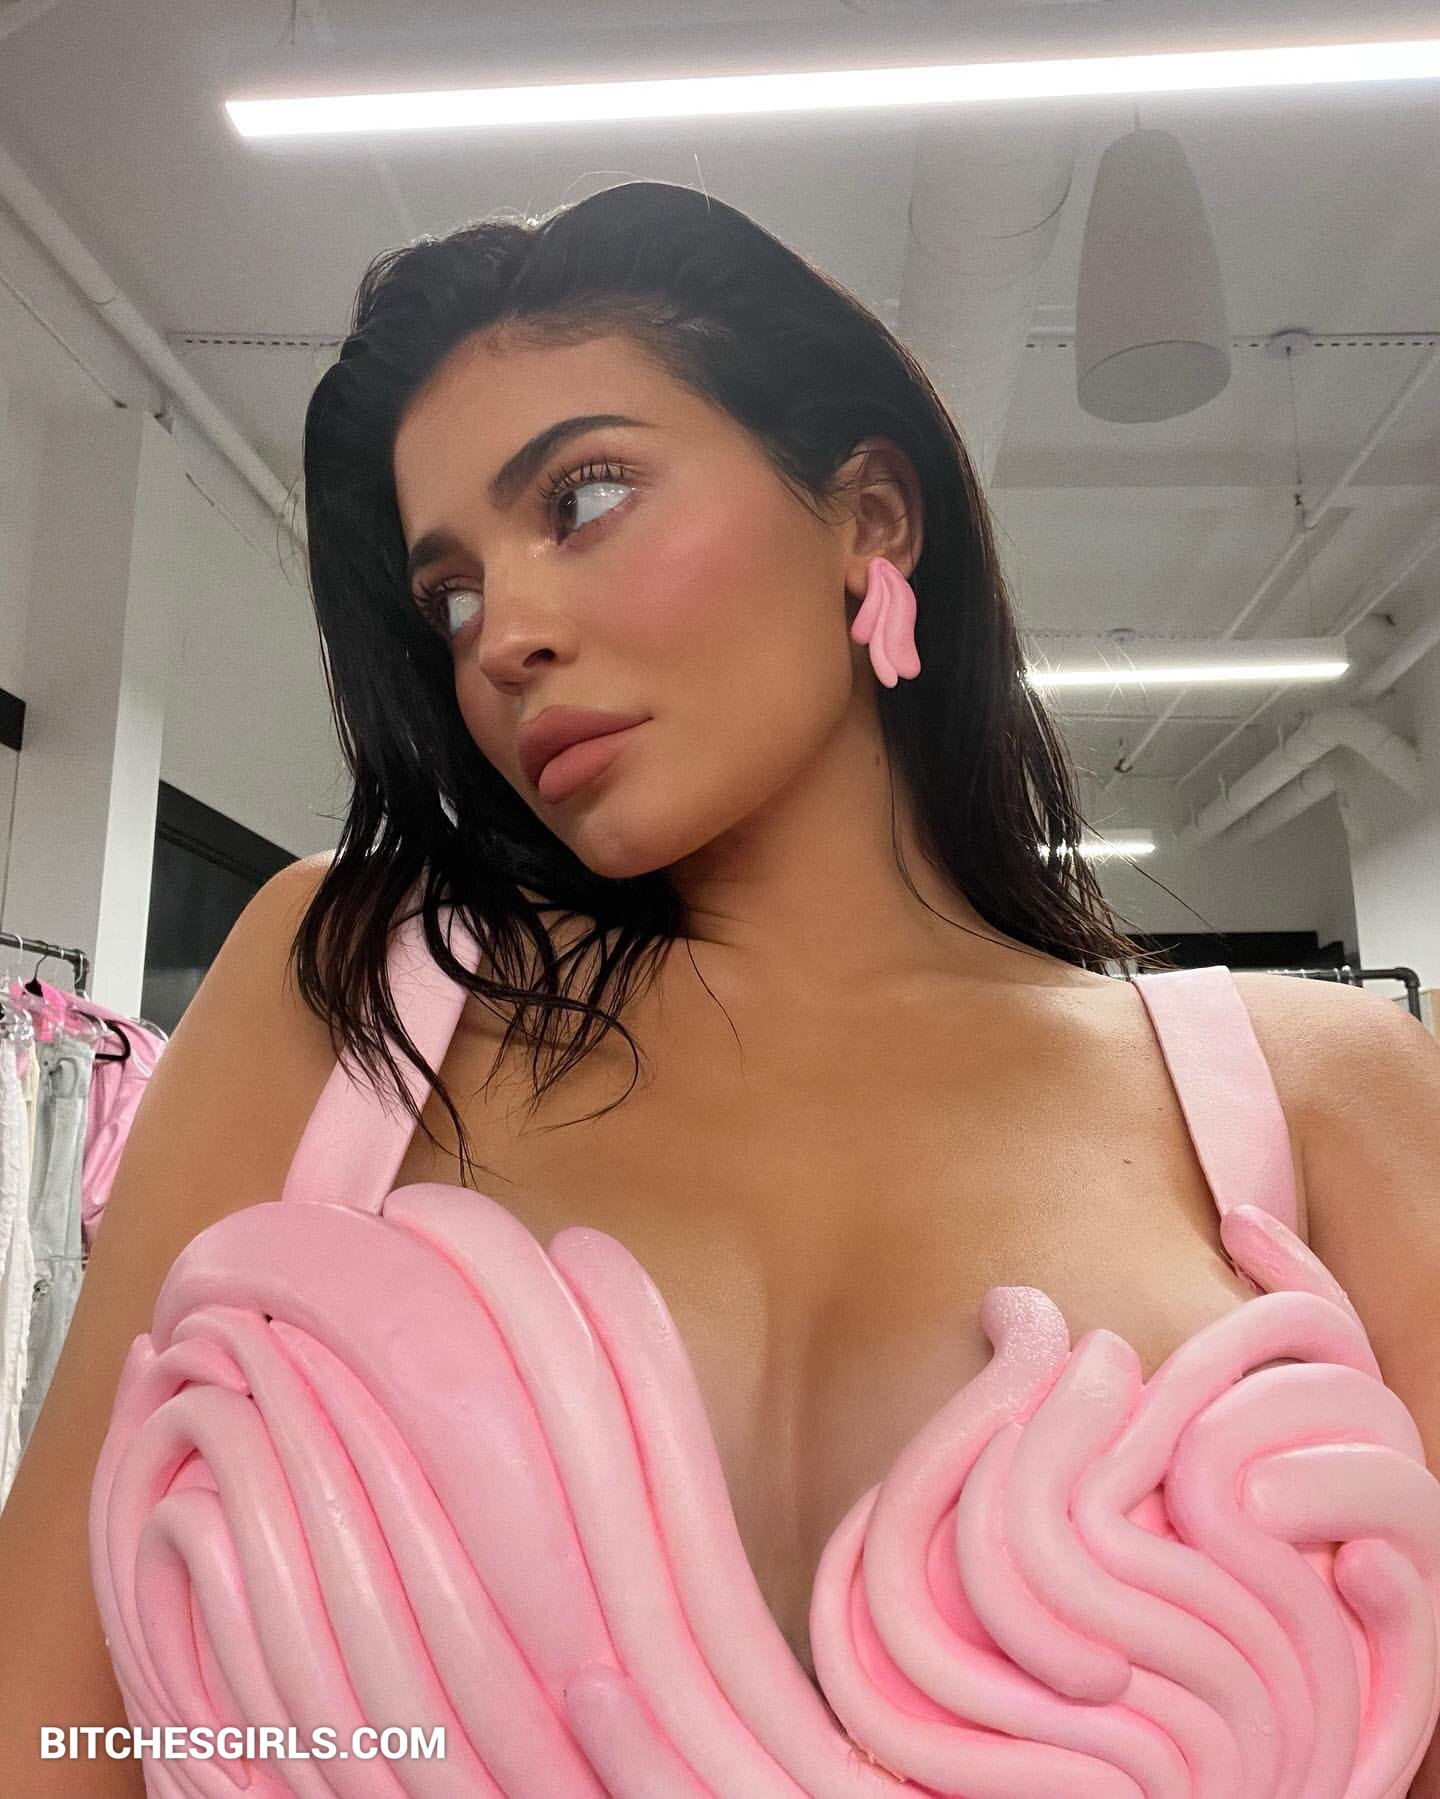 bonnie monteith add photo kylie jenner porn leaked